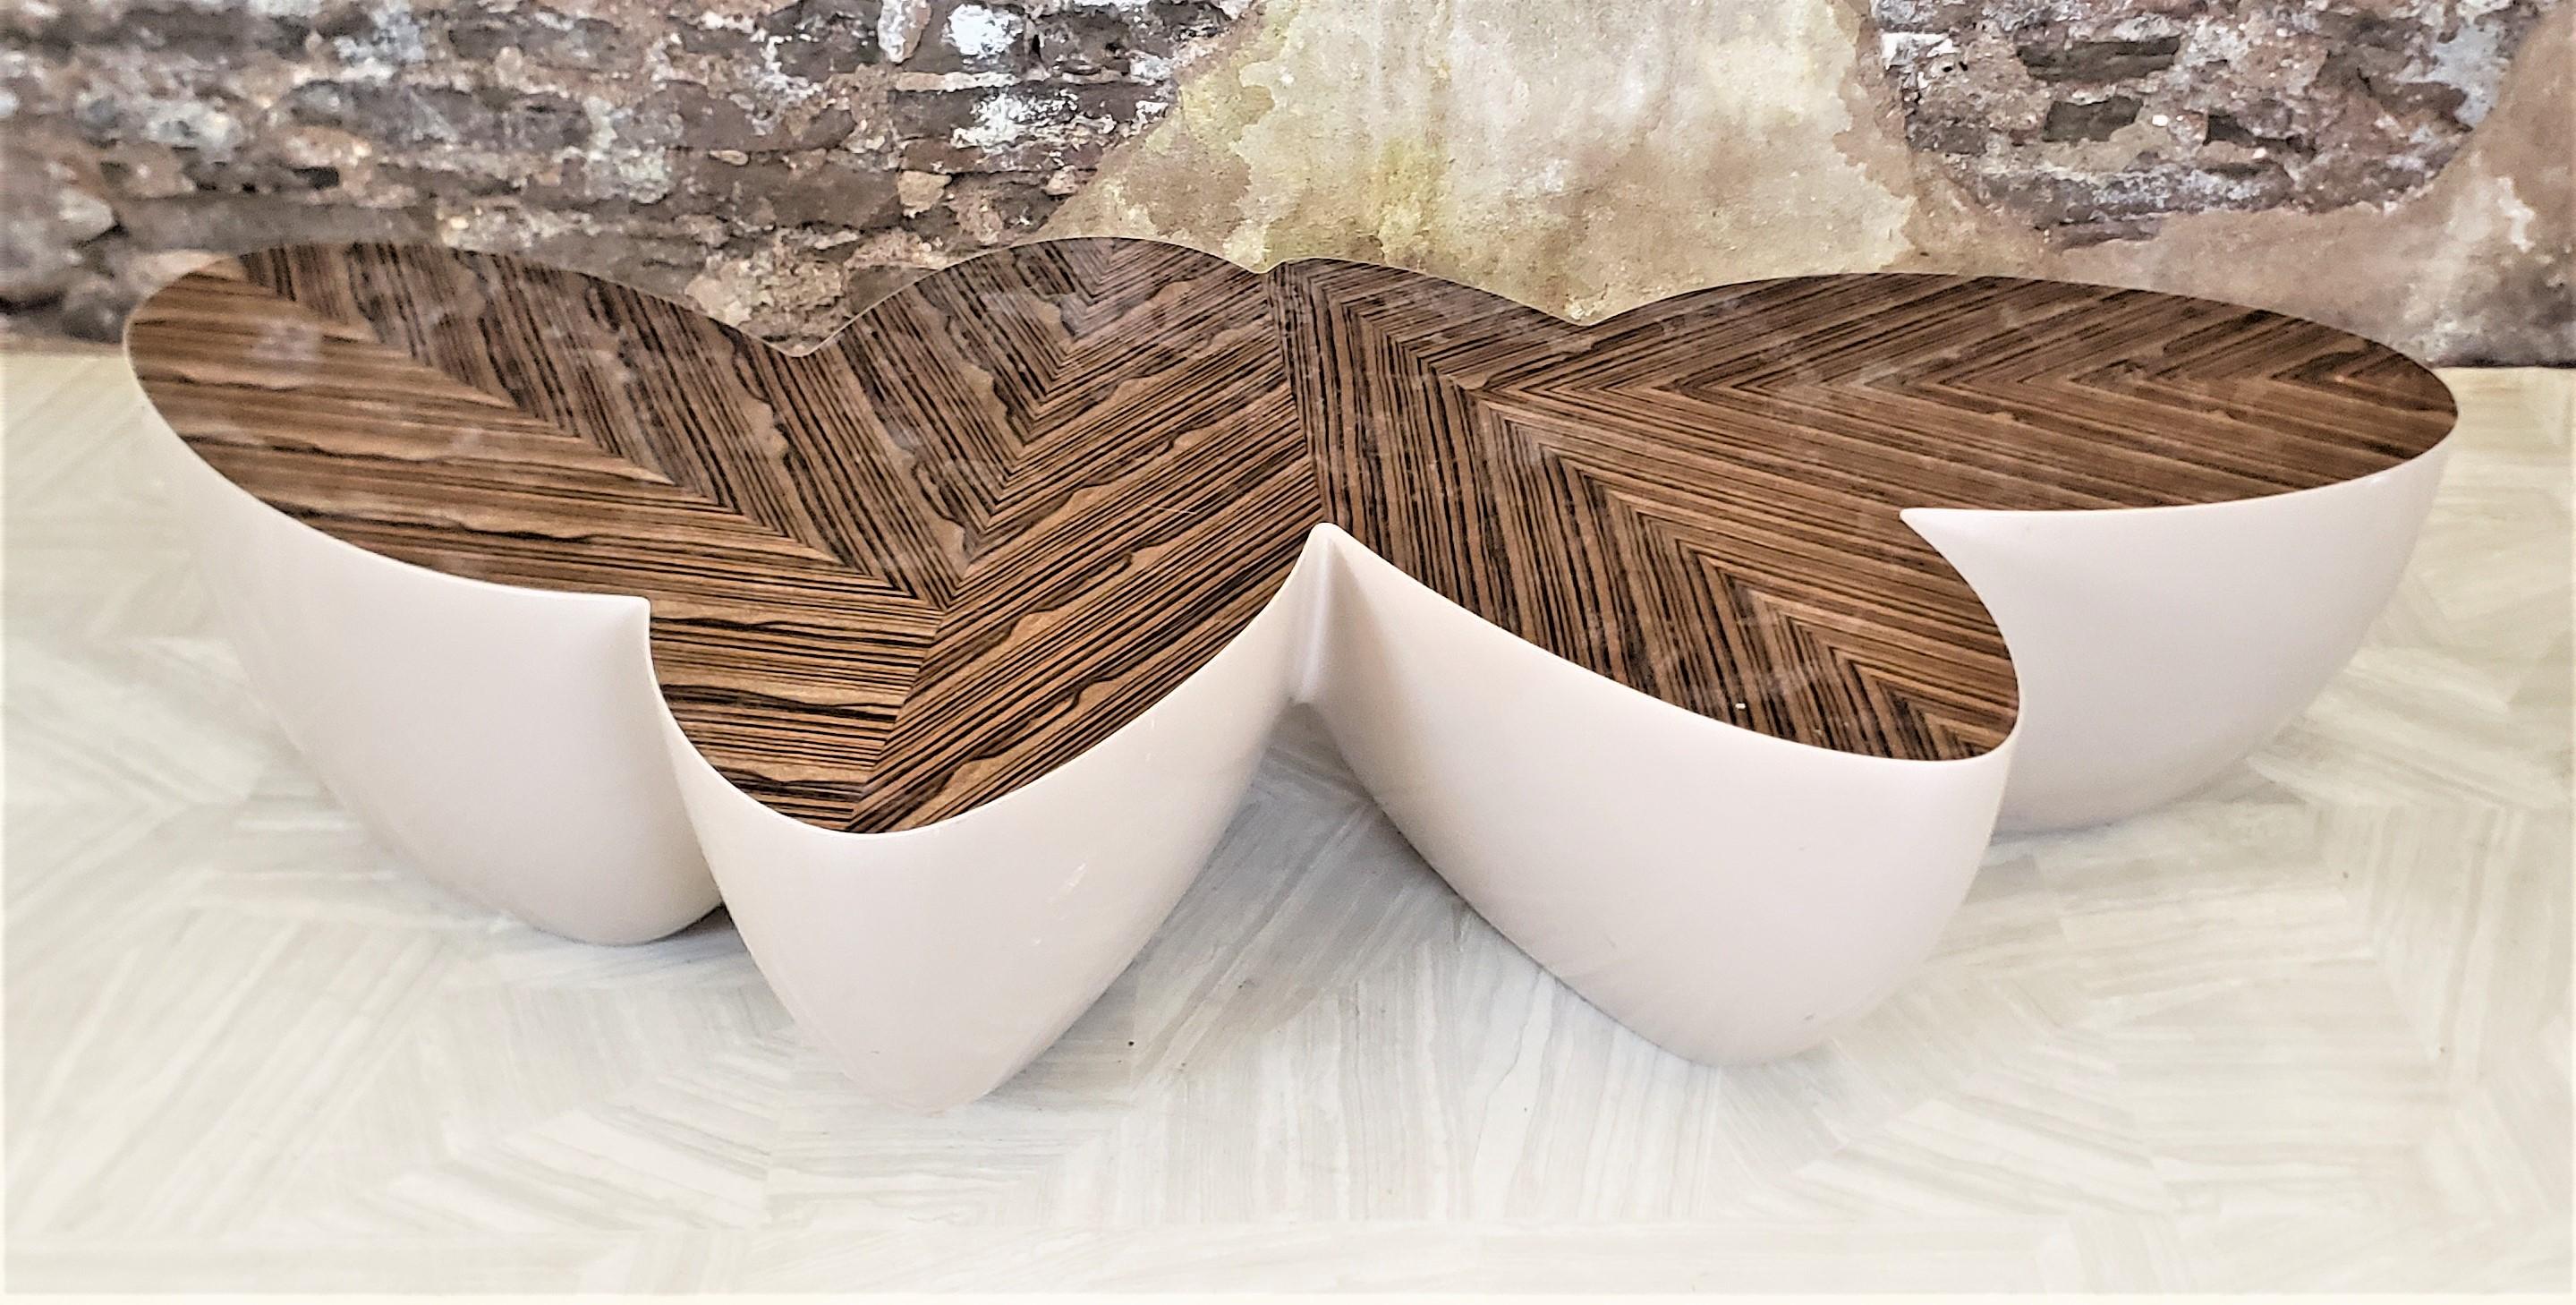 This coffee table was designed by Wendell Castle of the United States in approximately 1990 in his signature Modern Organic style. This coffee table is known as his Sizzle table and has a biomorphic shape with four palm leaf shaped 'pods'. The table